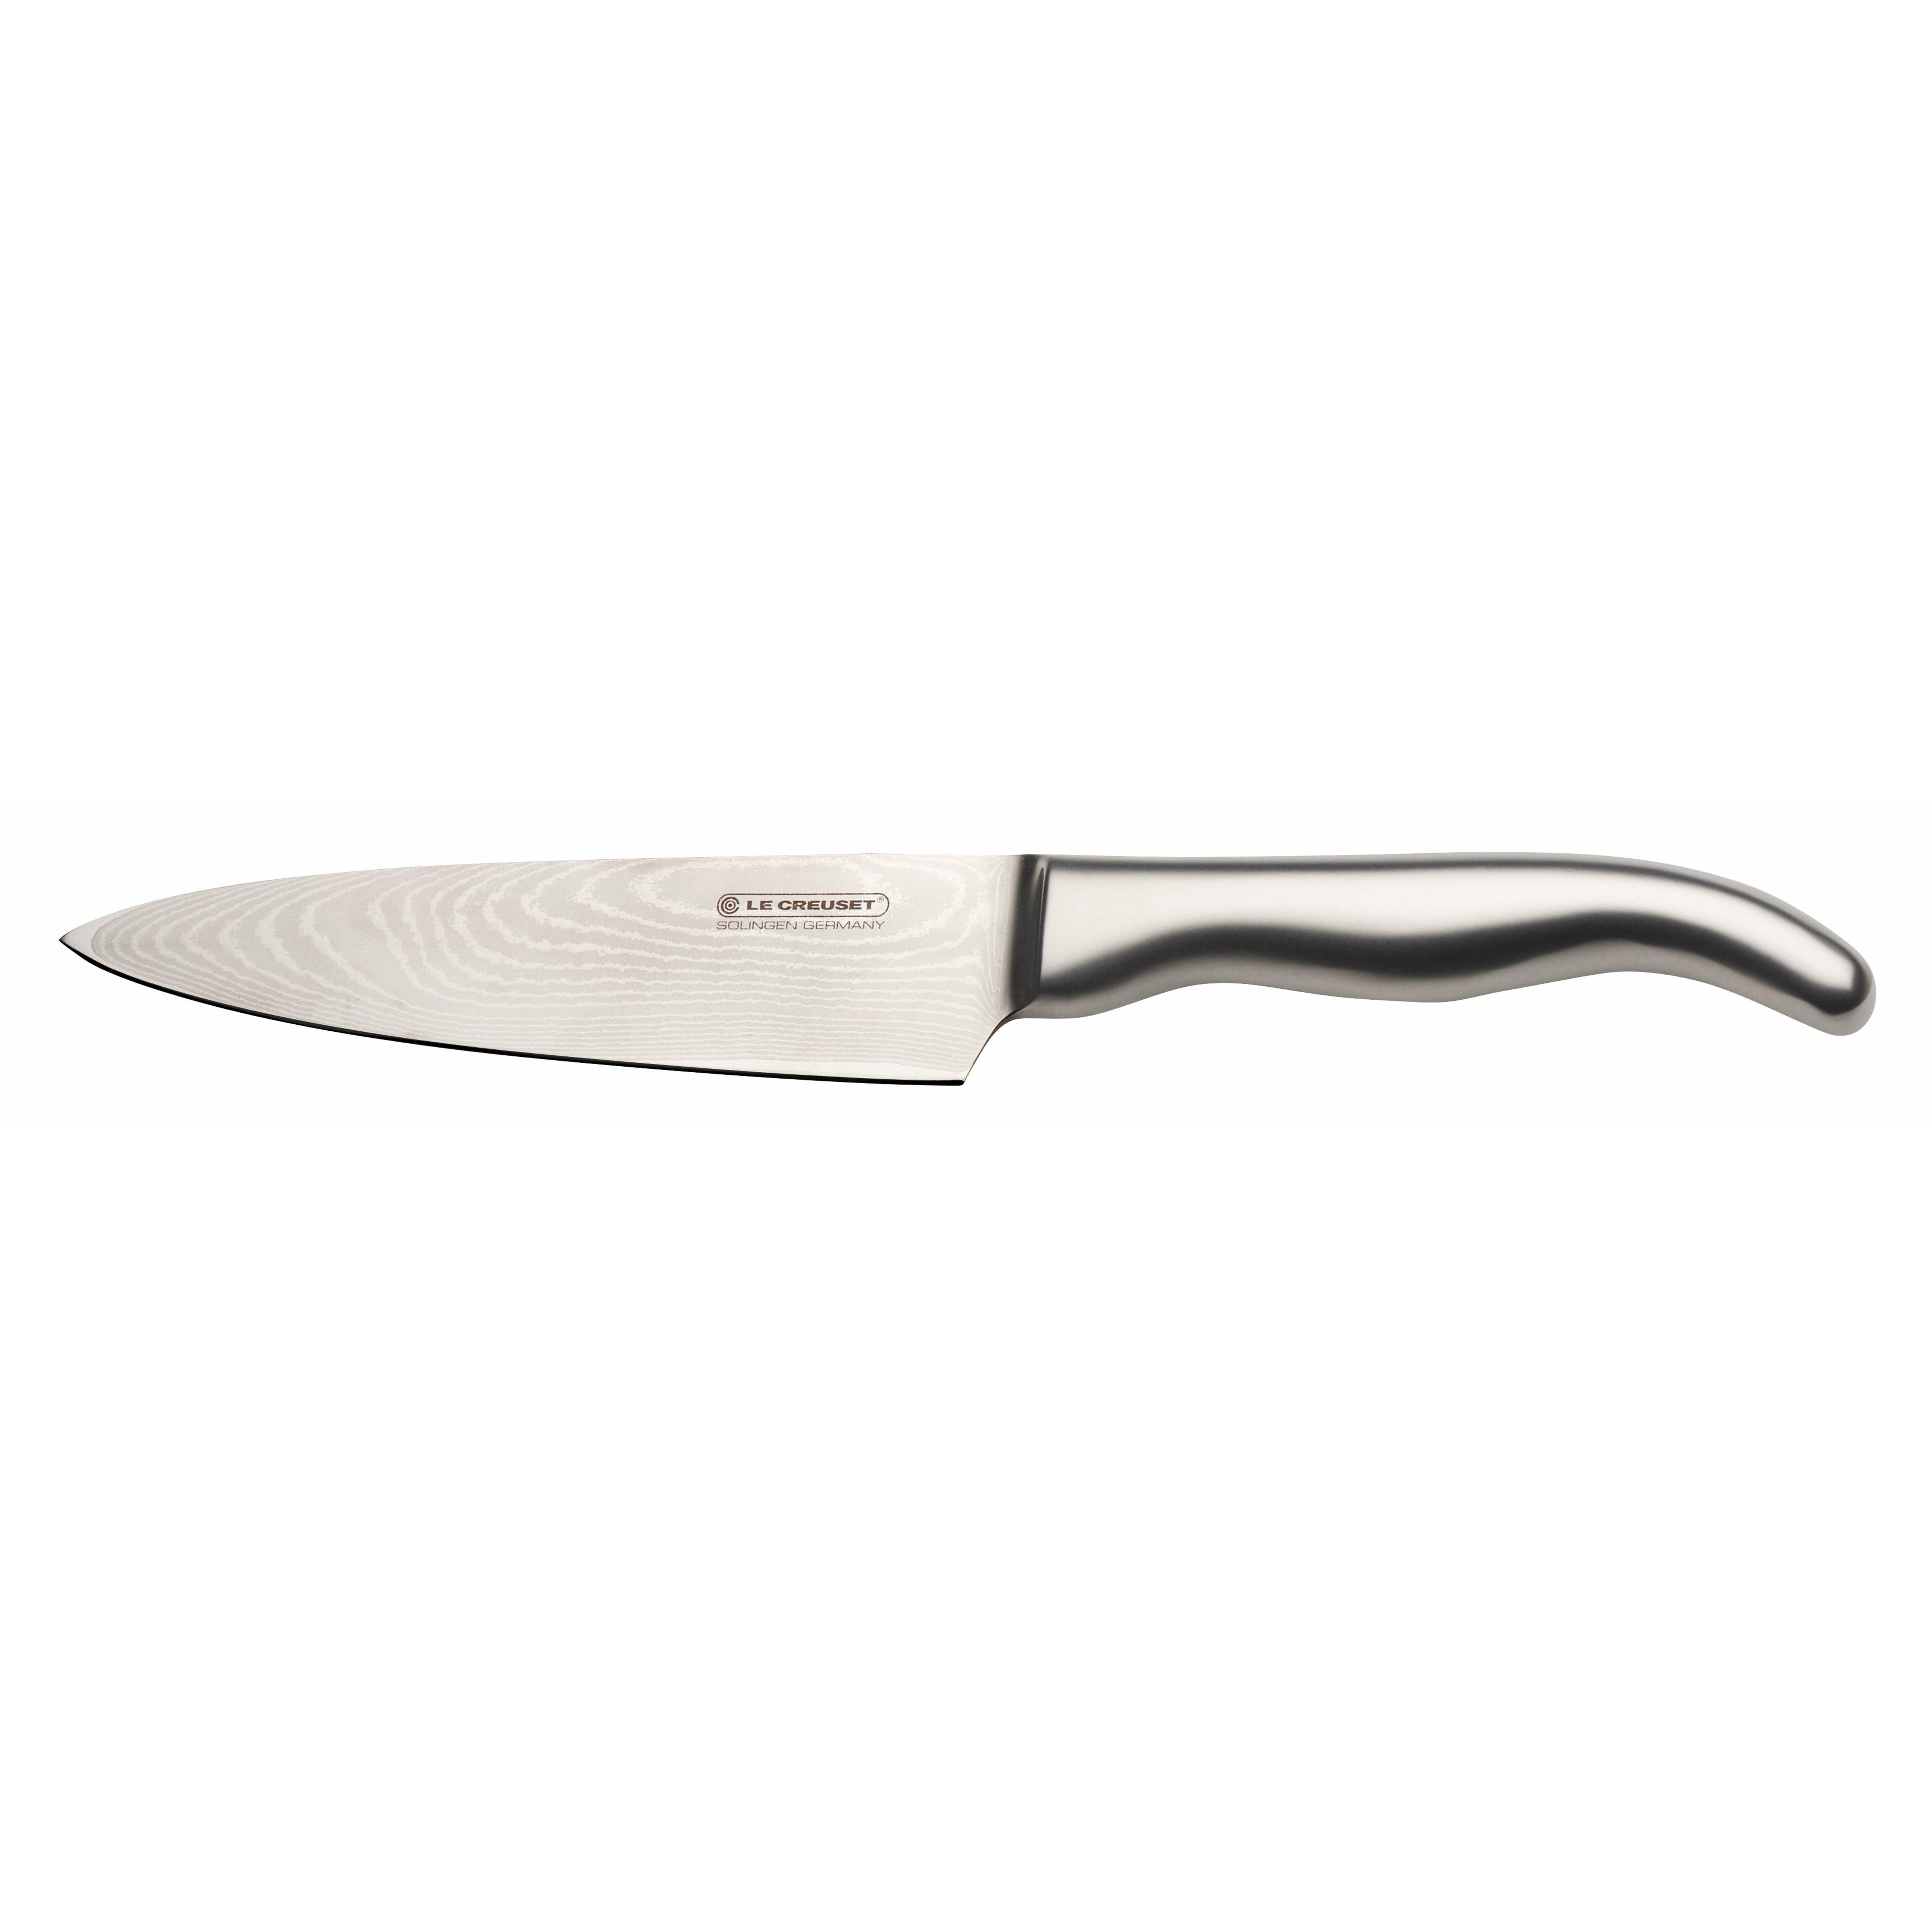 Le Creuset Chef's Knife Stainless Steel Handle, 15 Cm